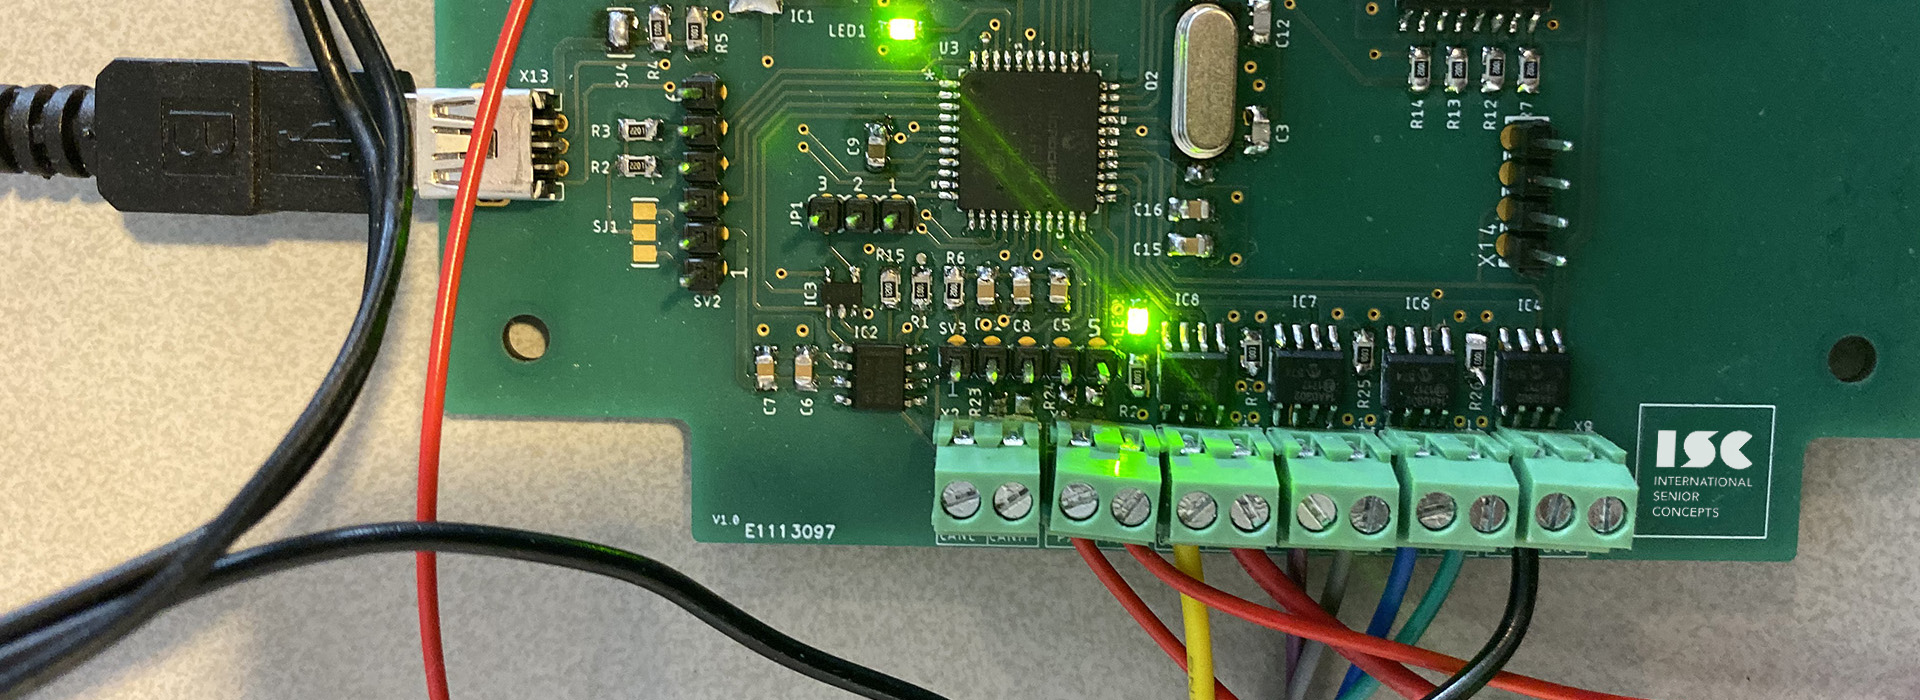 Circuit board for our game systems